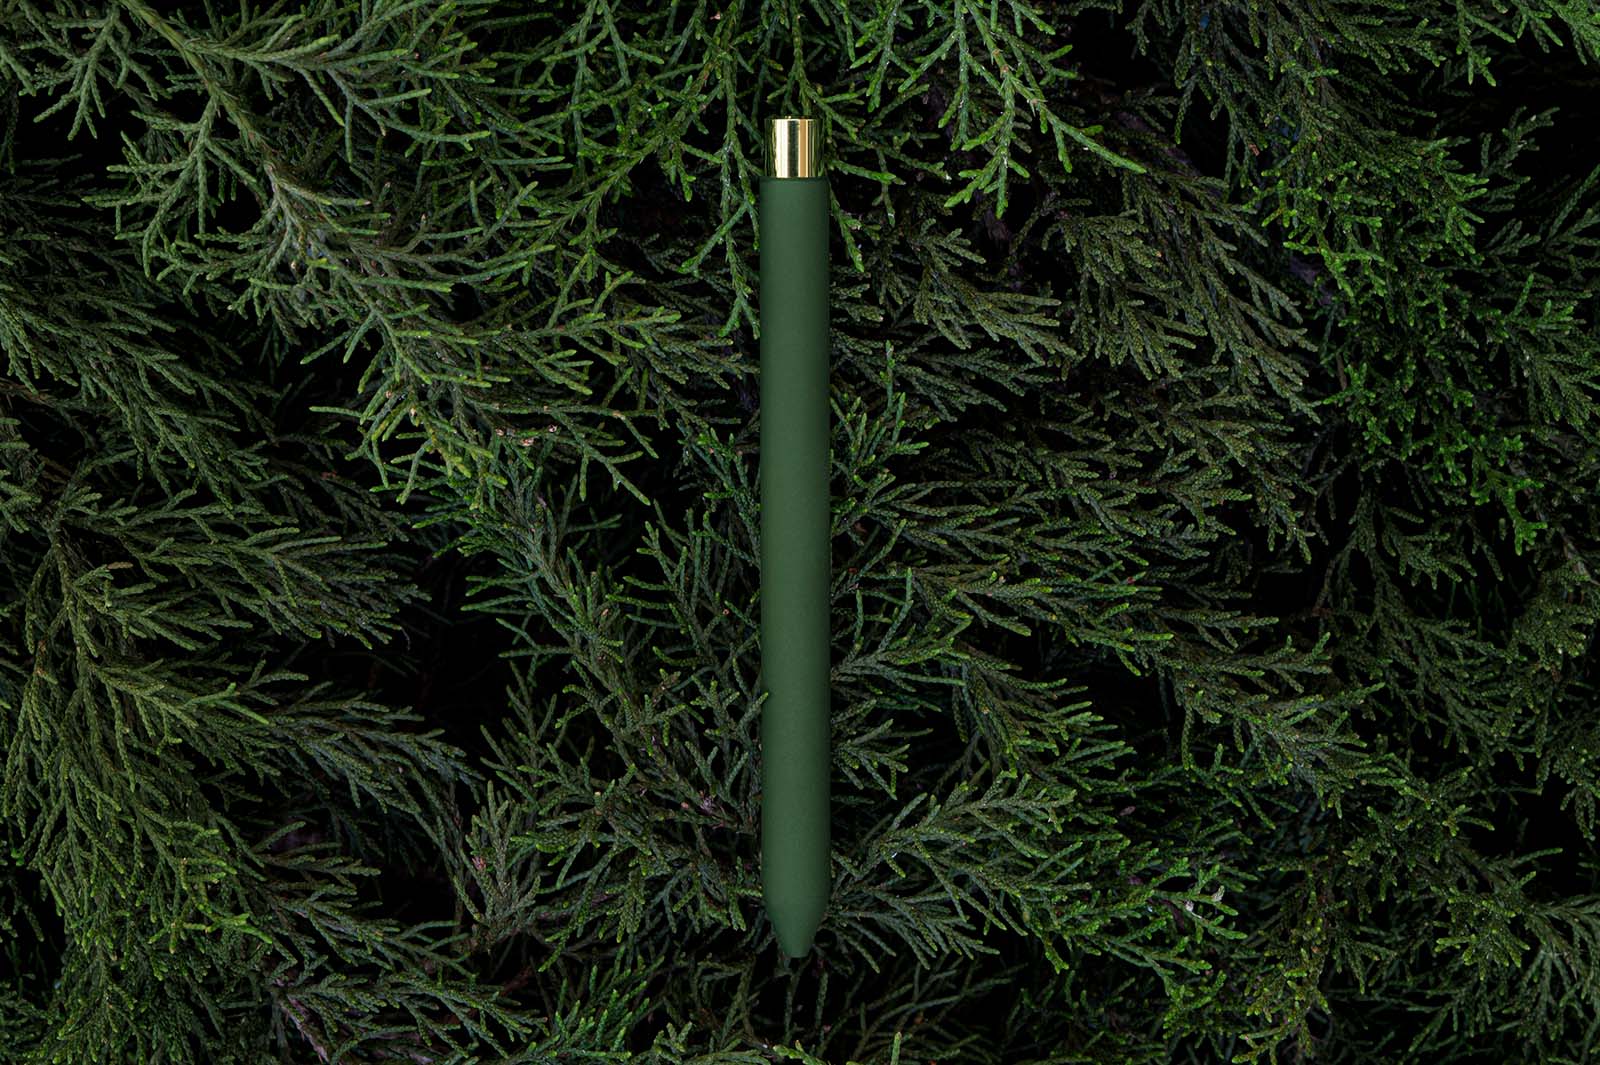 A mark one pen on pine boughs.